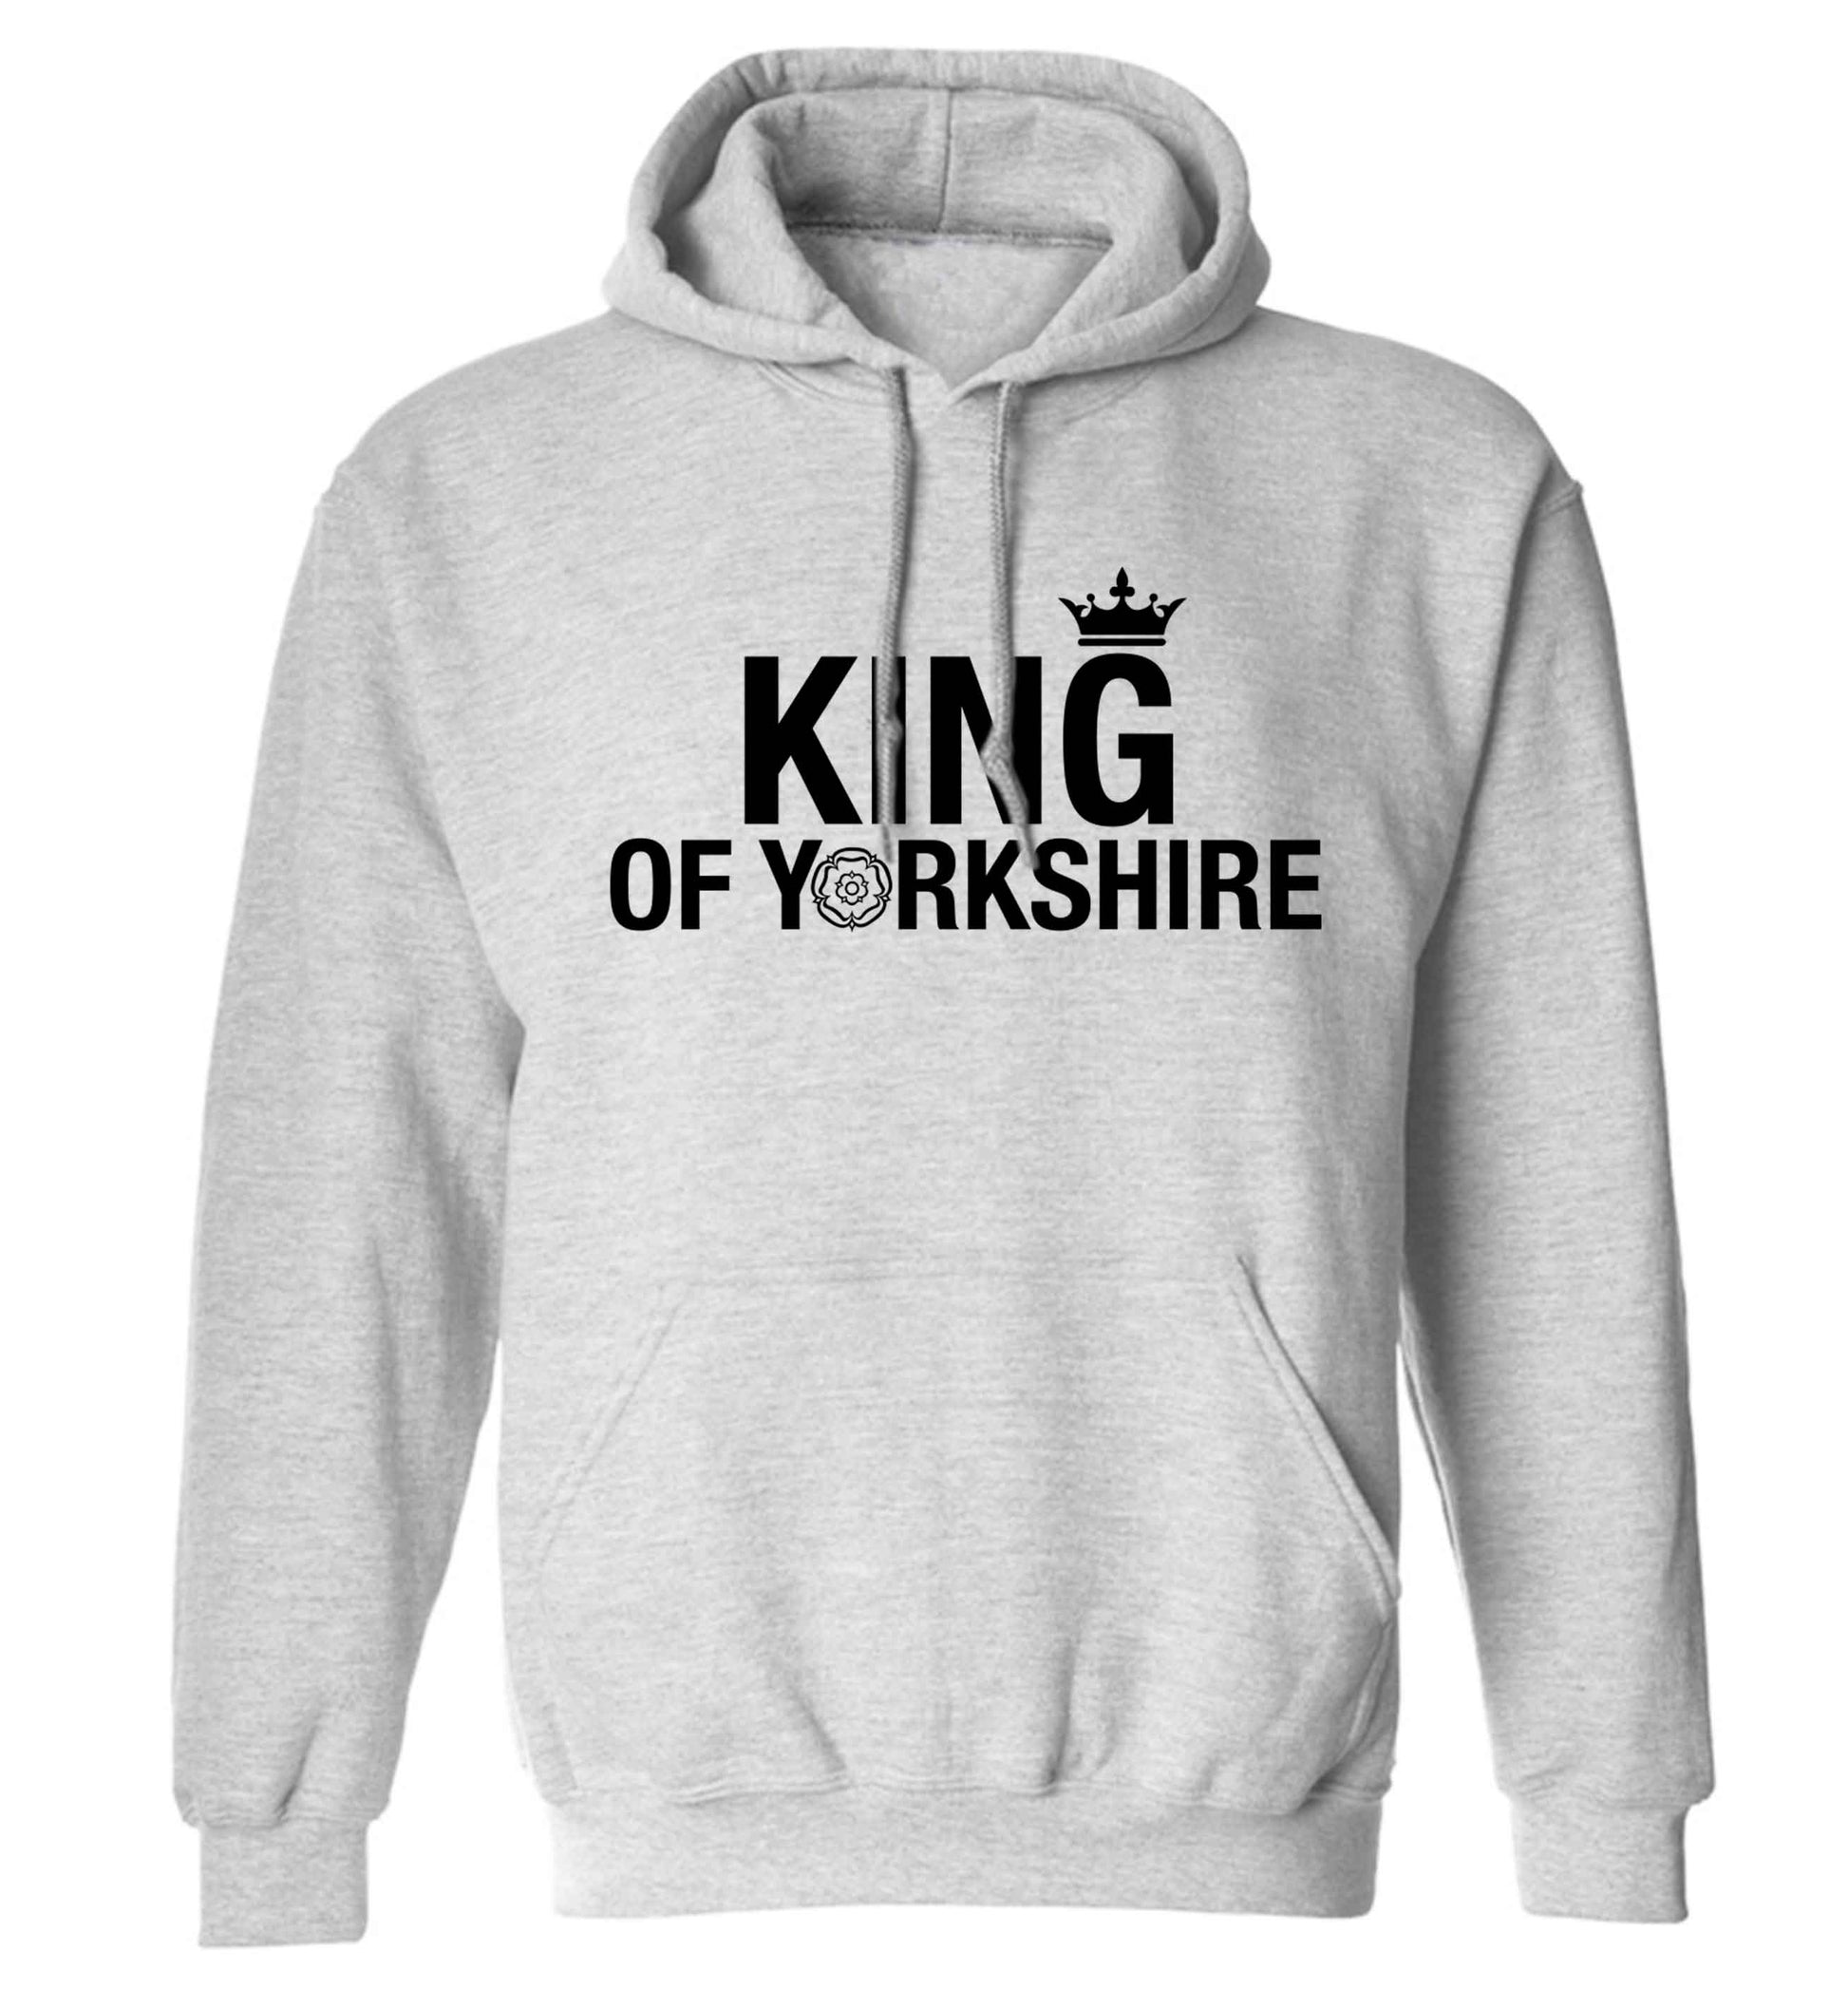 King of Yorkshire adults unisex grey hoodie 2XL